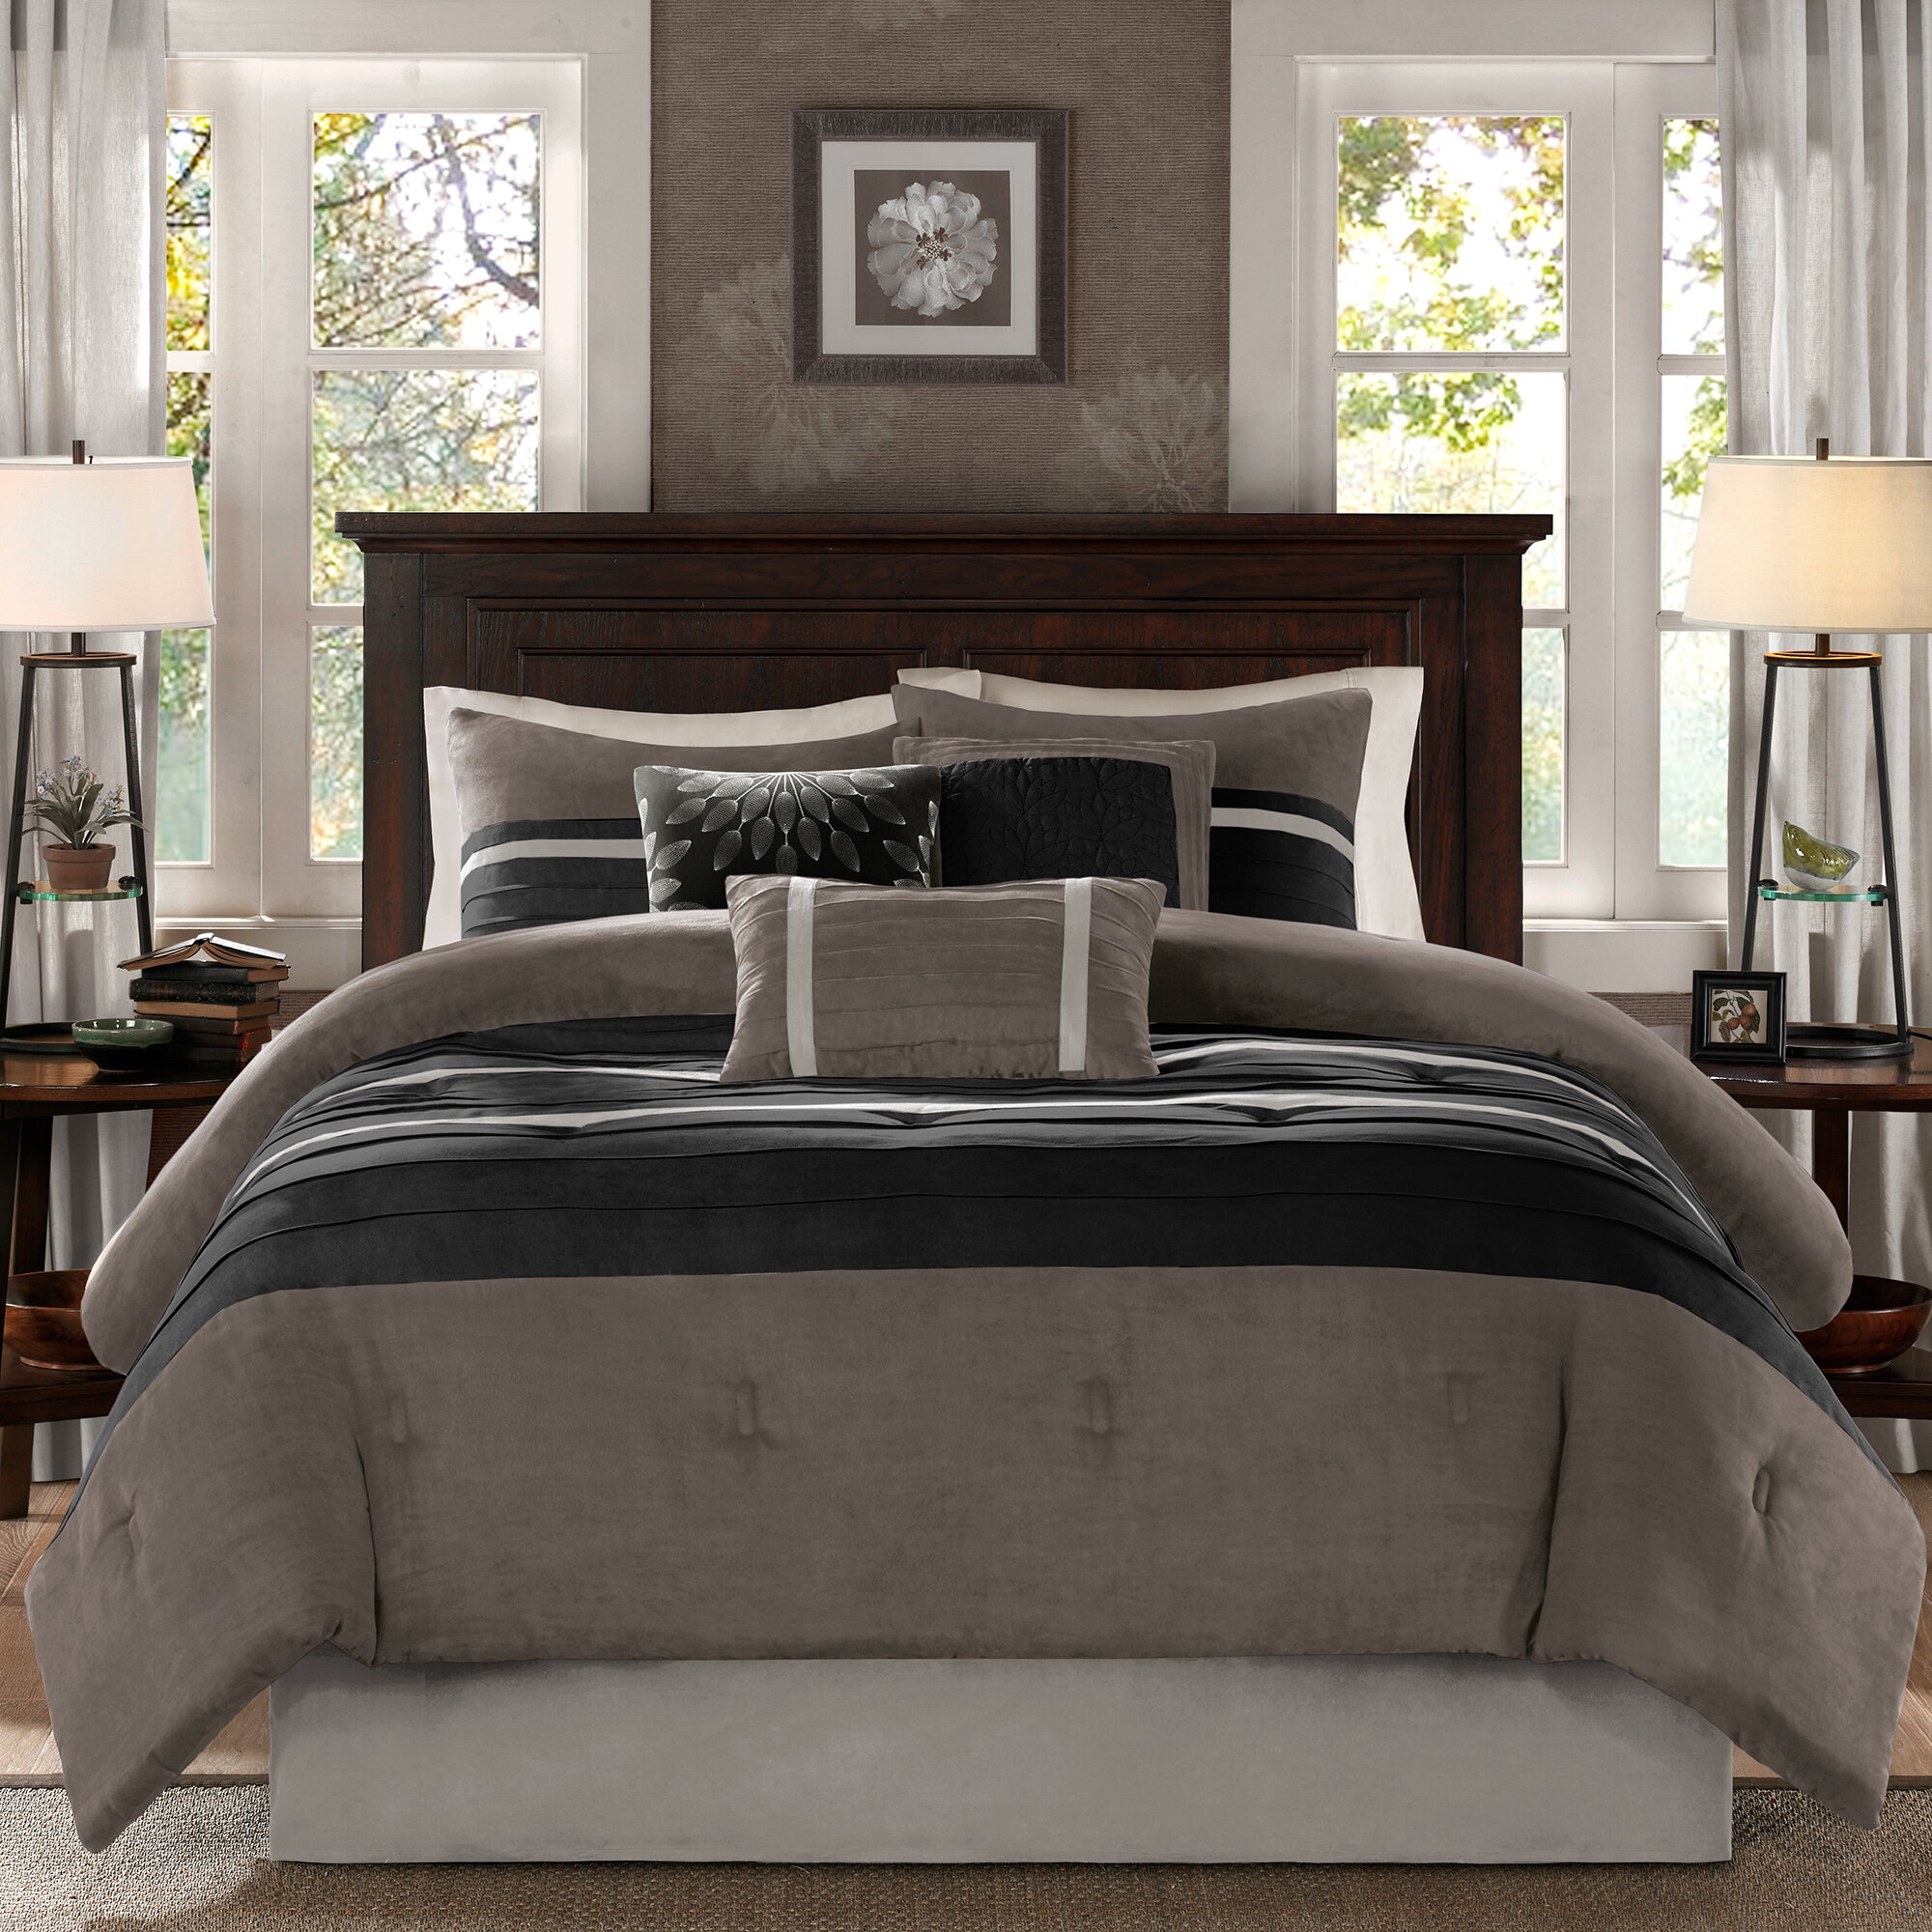 Black Gray Silver Comforters Sets Free Shipping Over 35 Wayfair